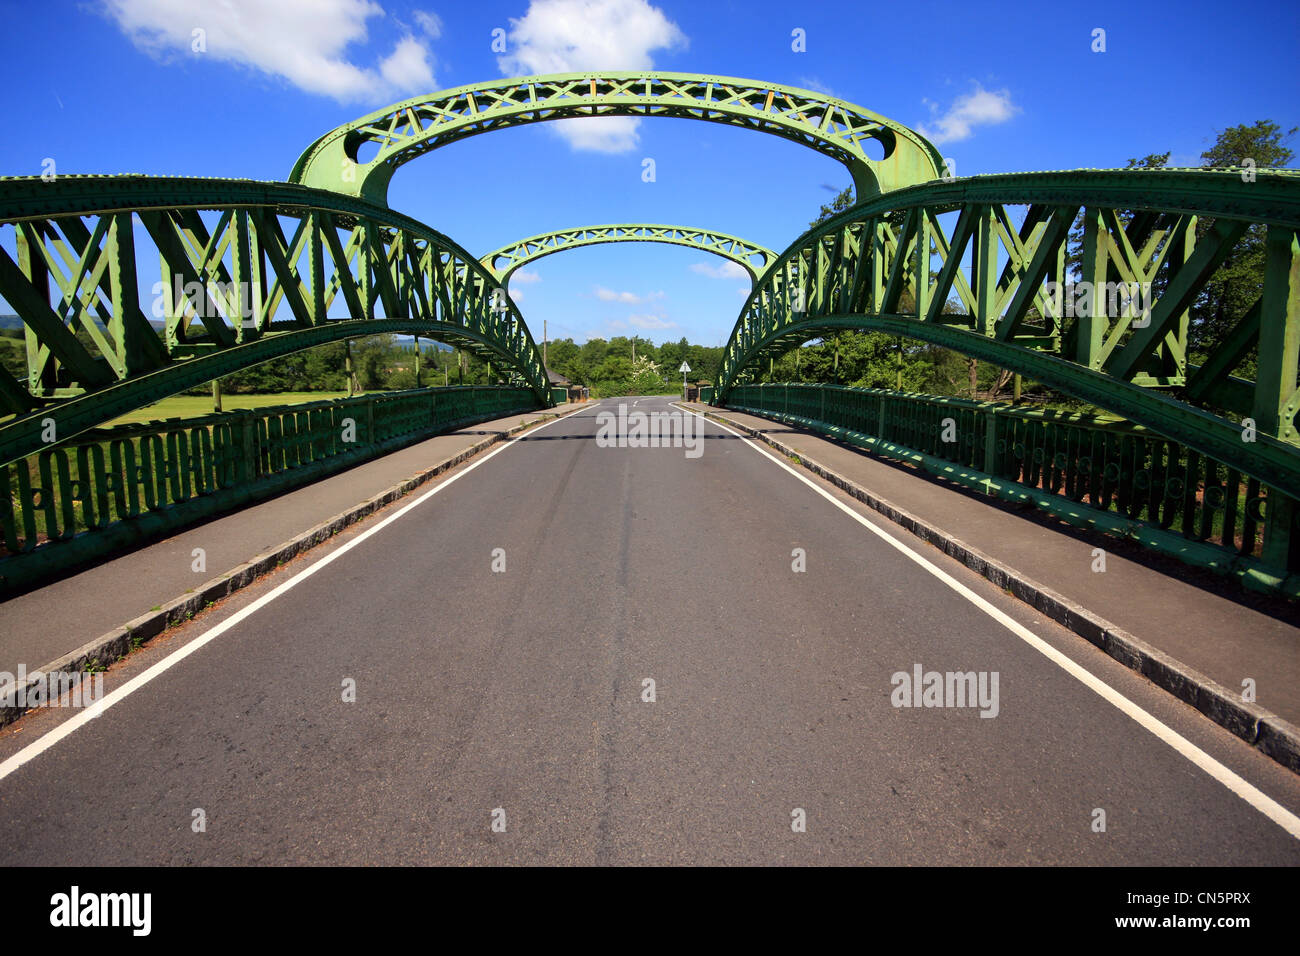 Chain Bridge or kemeys Bridge on the B4598 over the River Usk at Kemeys Commander Monmouthshire South Wales UK GB Stock Photo